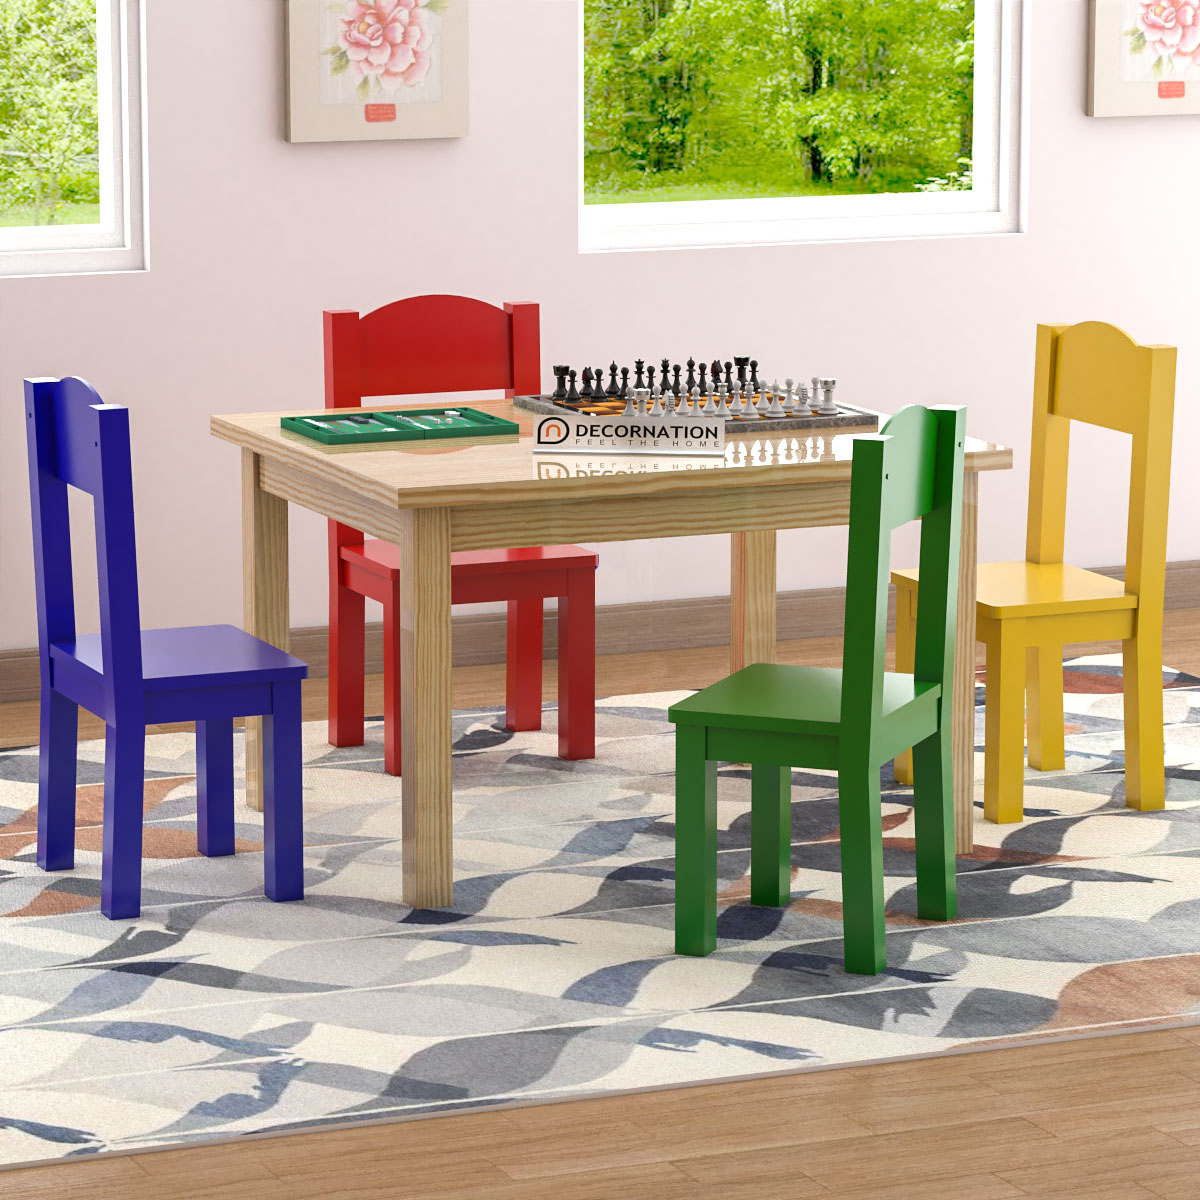 wood table and chairs for toddlers